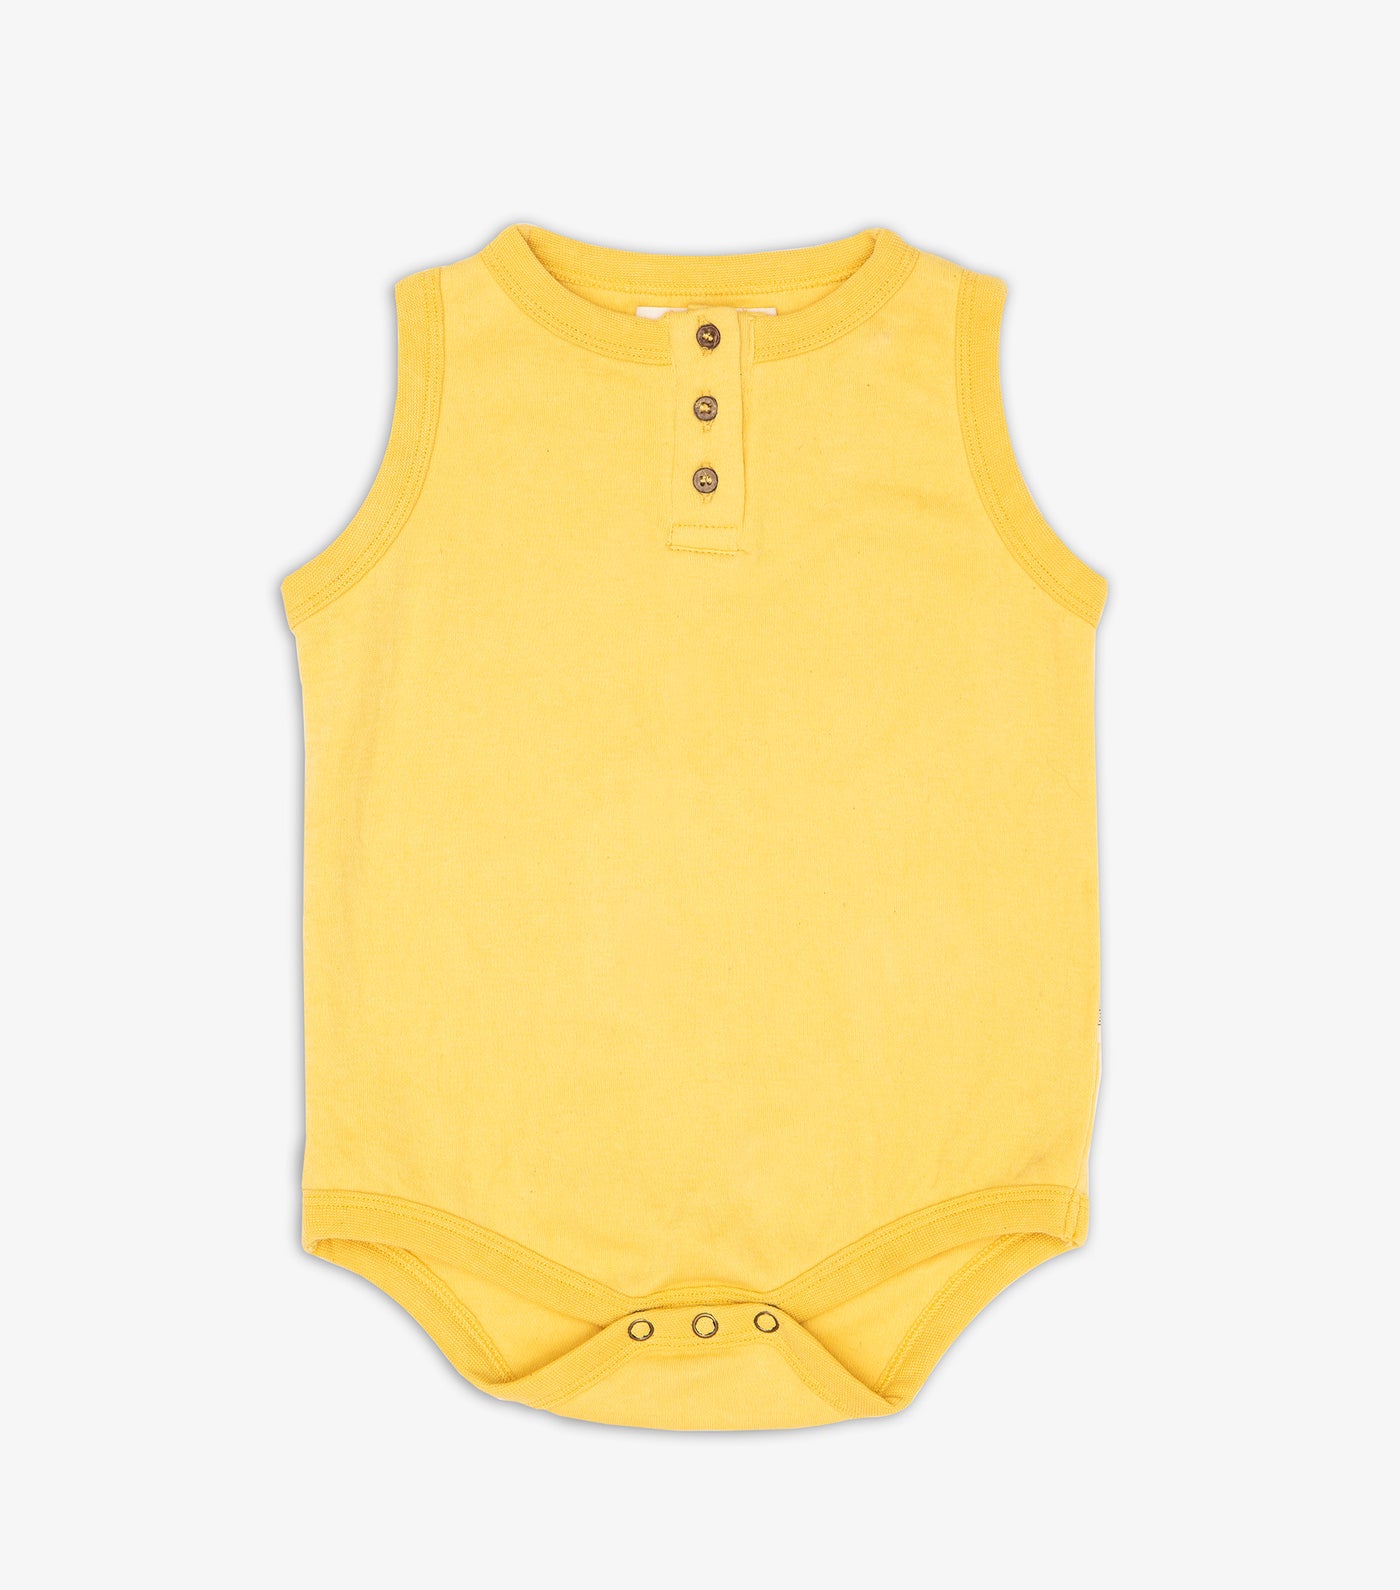 Last Chance Baby Singlet Onesie With Buttons - Aspen Gold